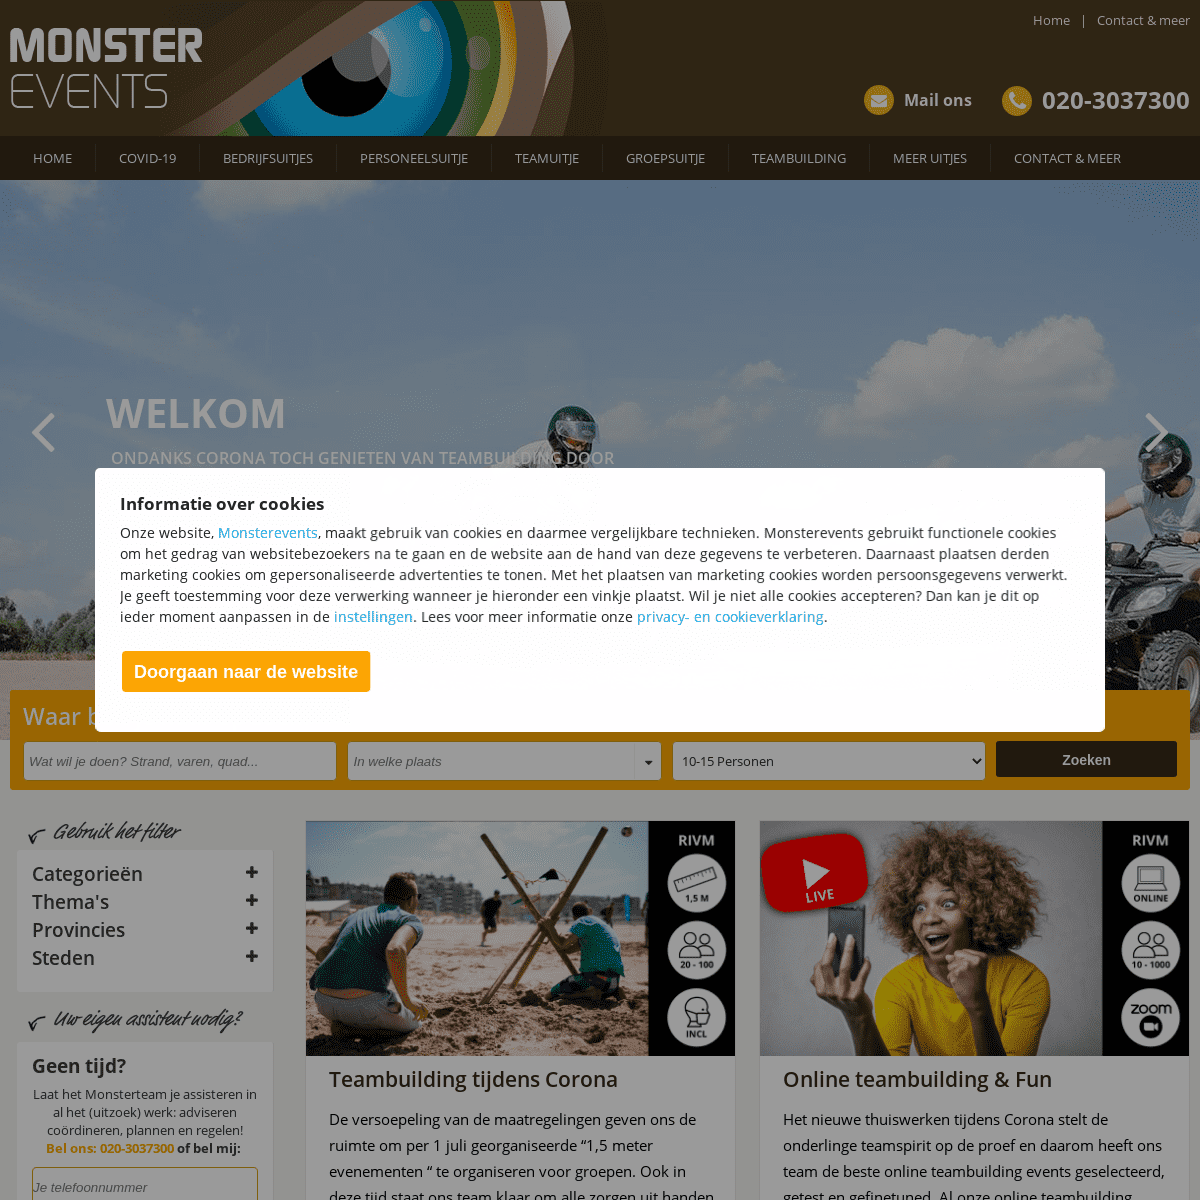 A complete backup of https://monsterevents.nl